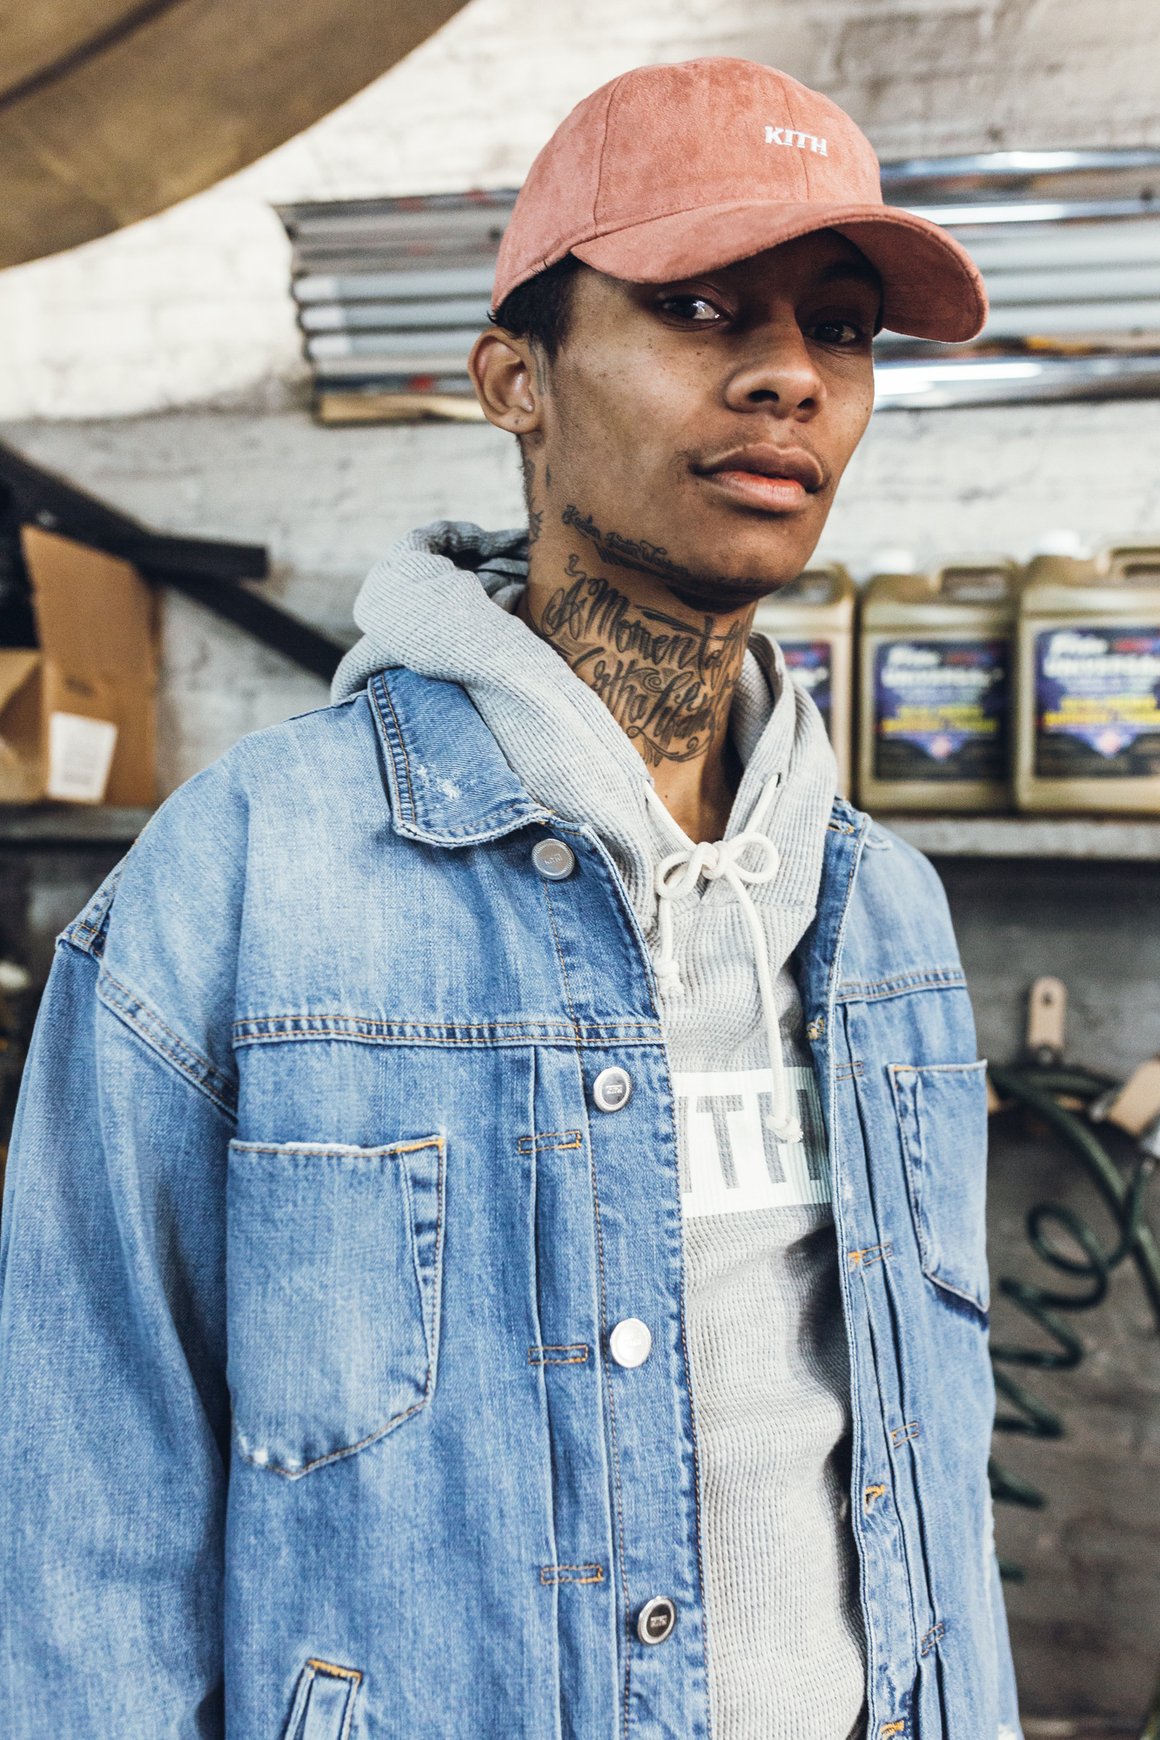 Kith enters denim category, several pieces sell out upon arrival